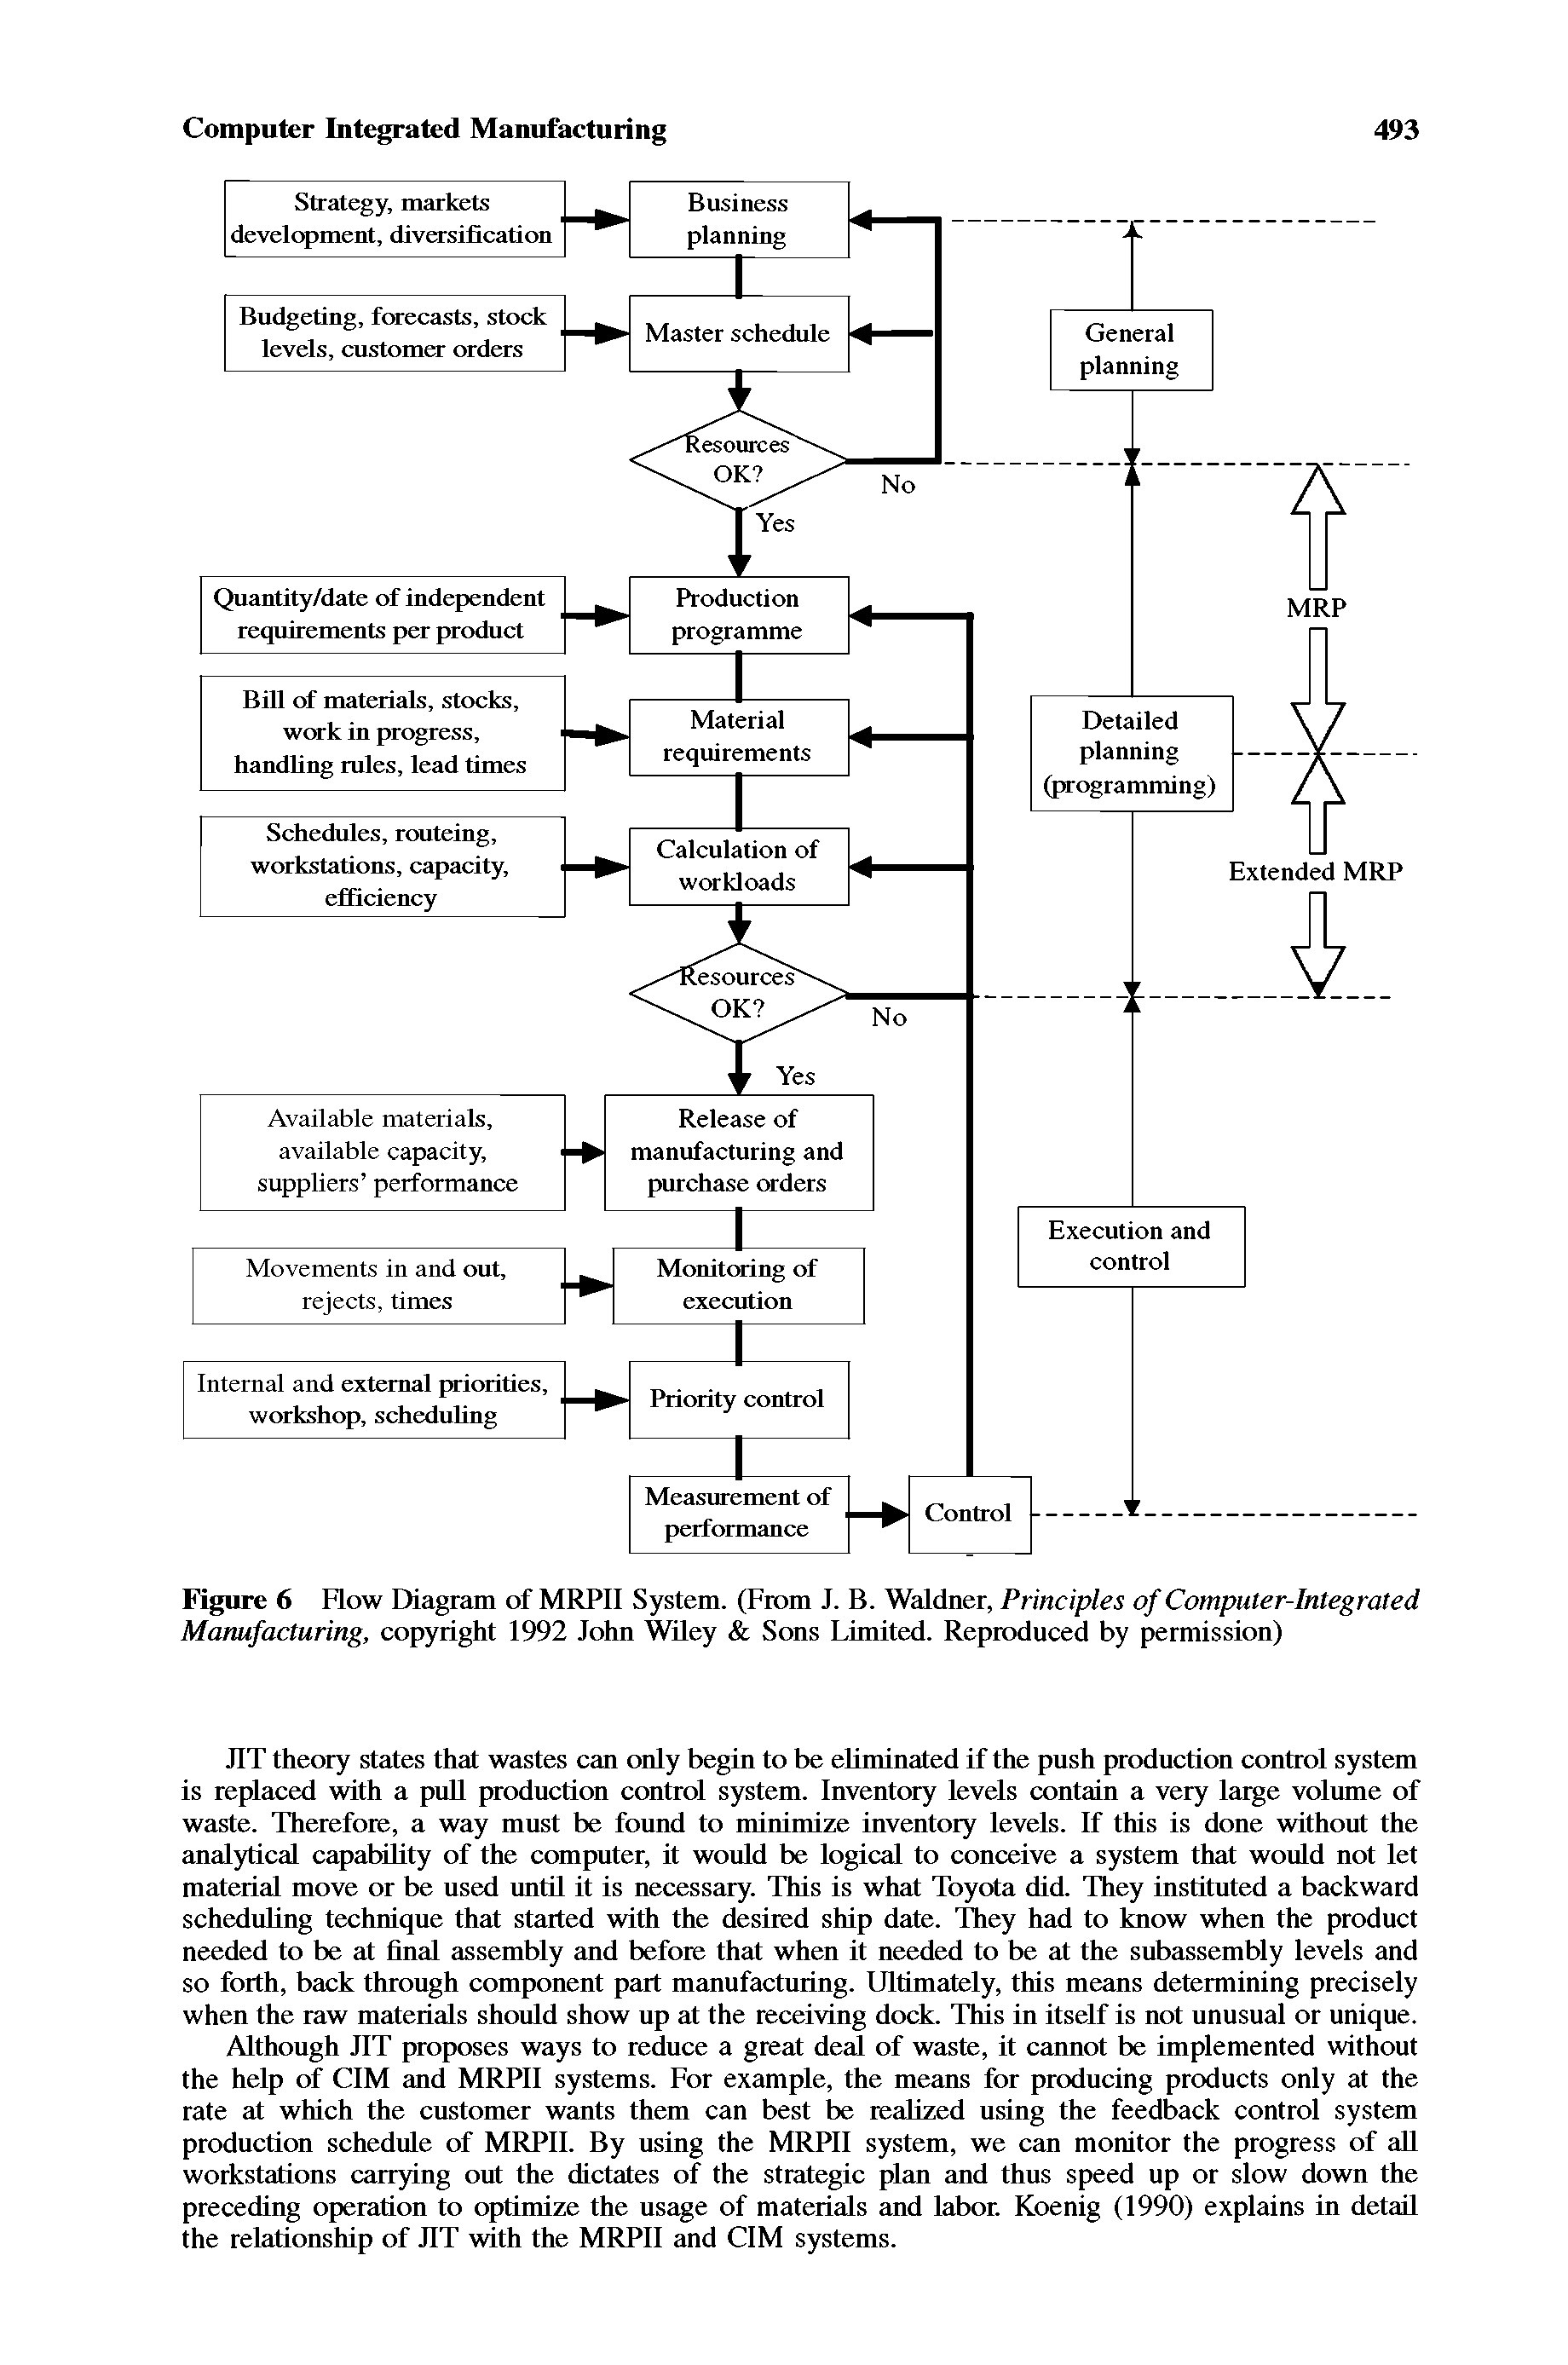 Figure 6 Flow Diagram of MRPII System. (From J. B. Waldner, Principles of Computer-Integrated Manufacturing, copyright 1992 John Wiley Sons Limited. Reproduced by permission)...